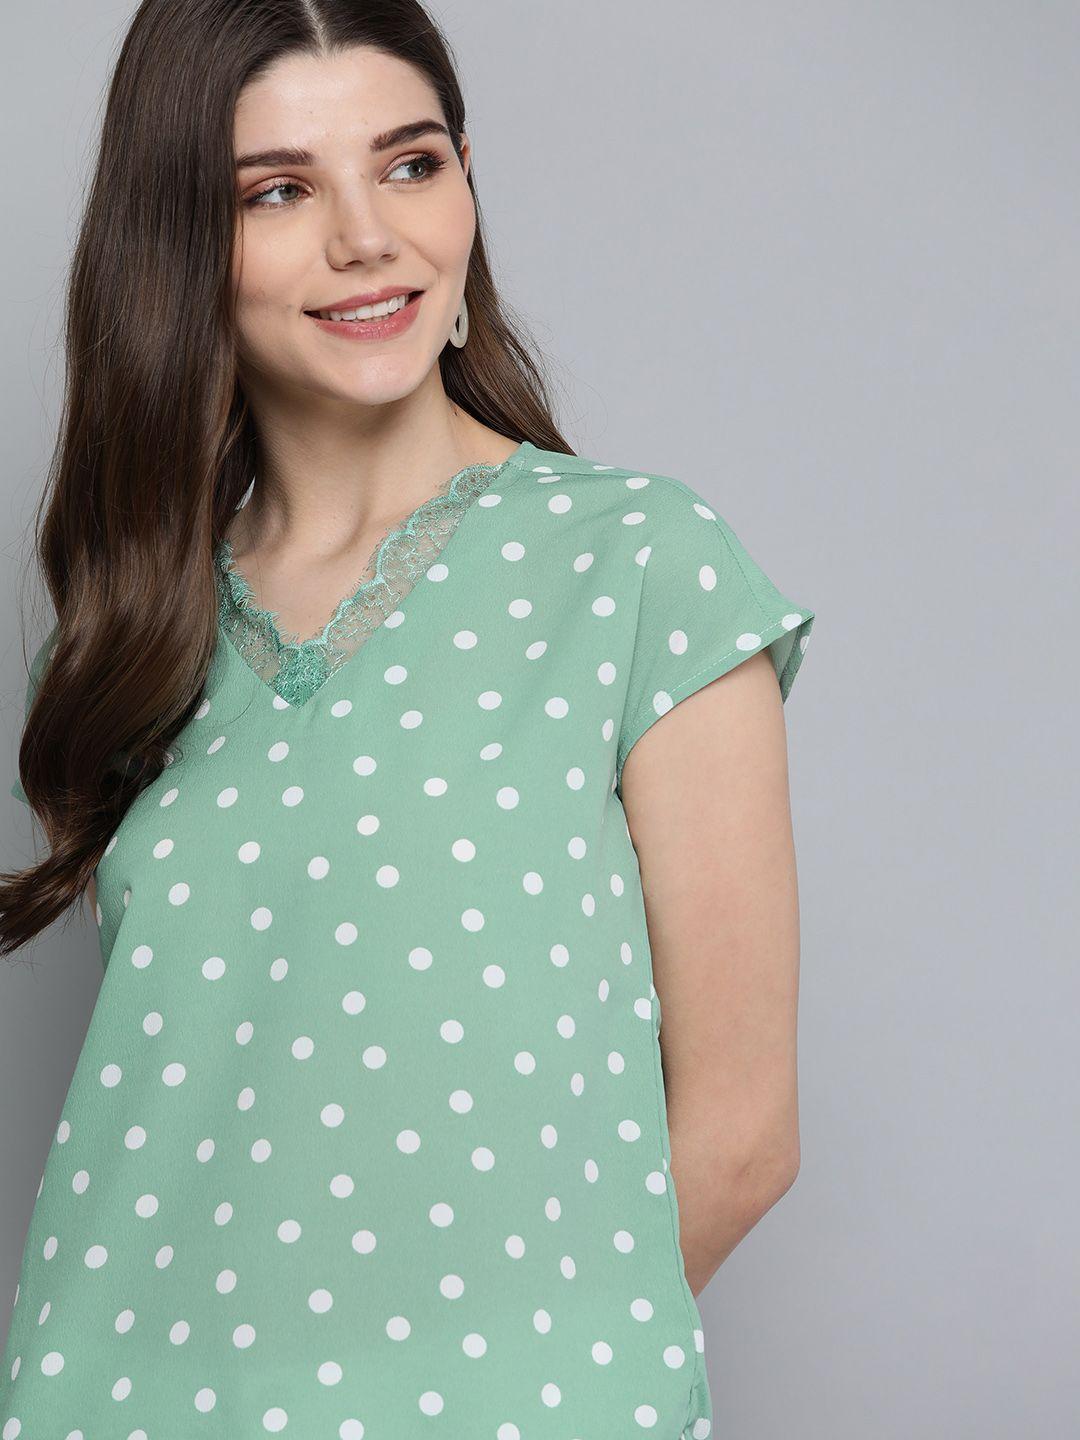 mast & harbour green & white polka dots print lace detail top